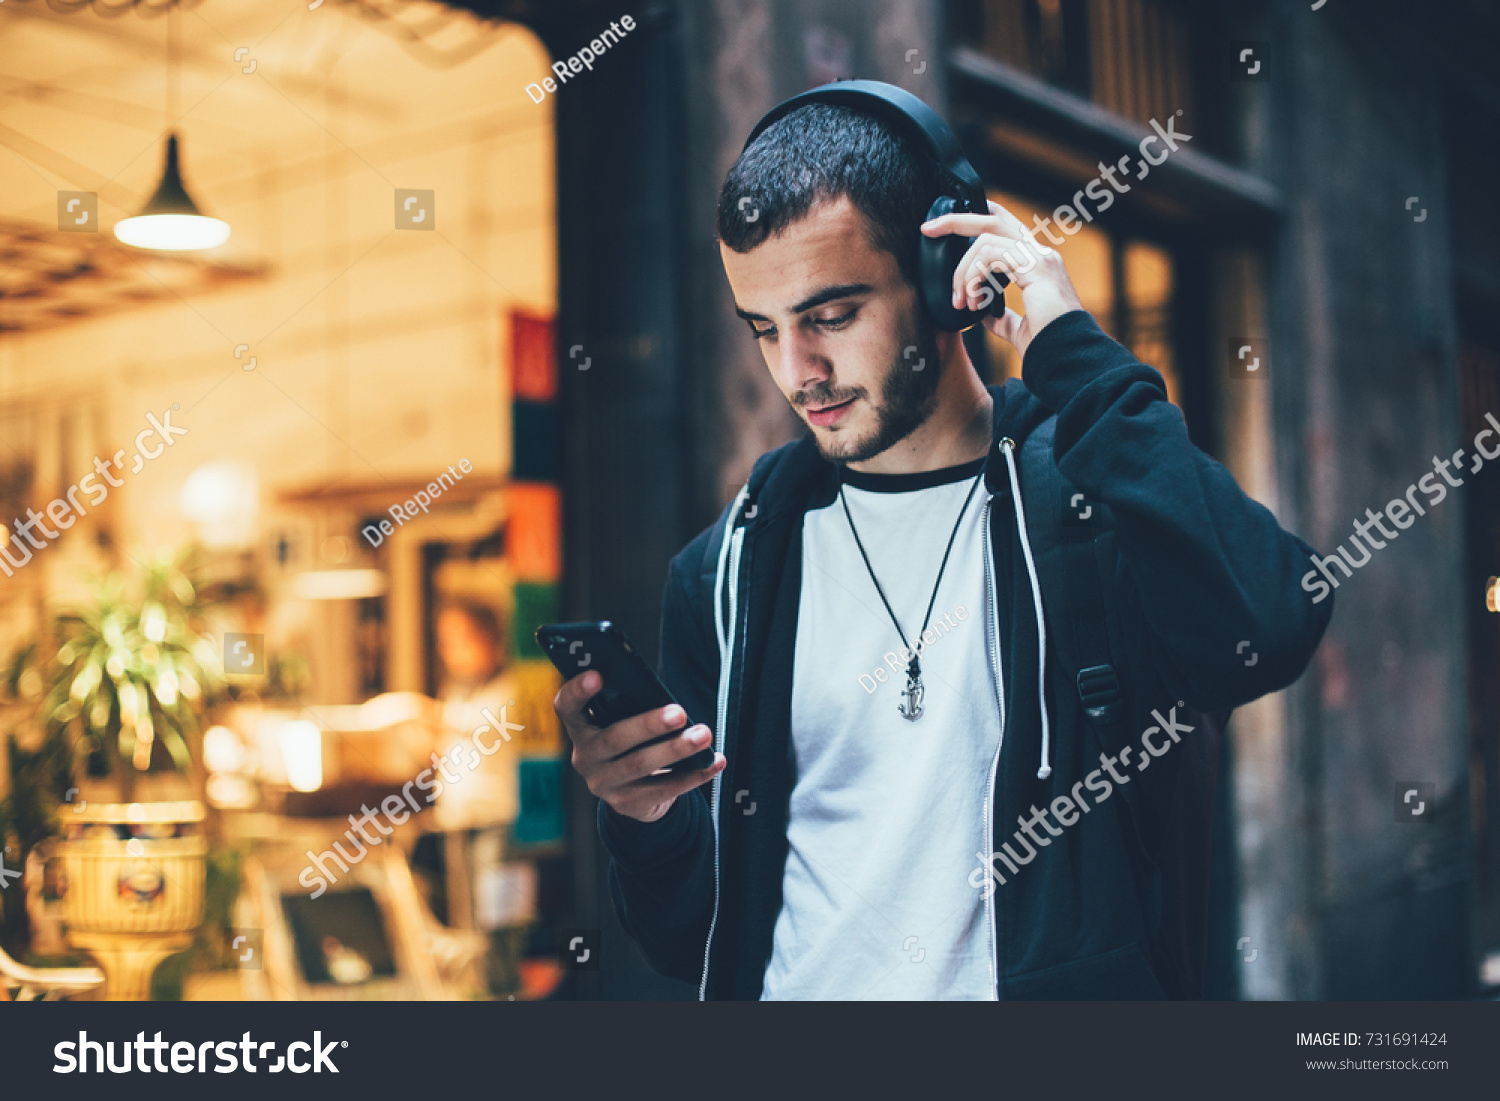 Hispanic young attractive man stands in dark street in front of shop, changes songs and tracks on smartphone, listens to music in wireless headphones. Hipster with slight beard #731691424